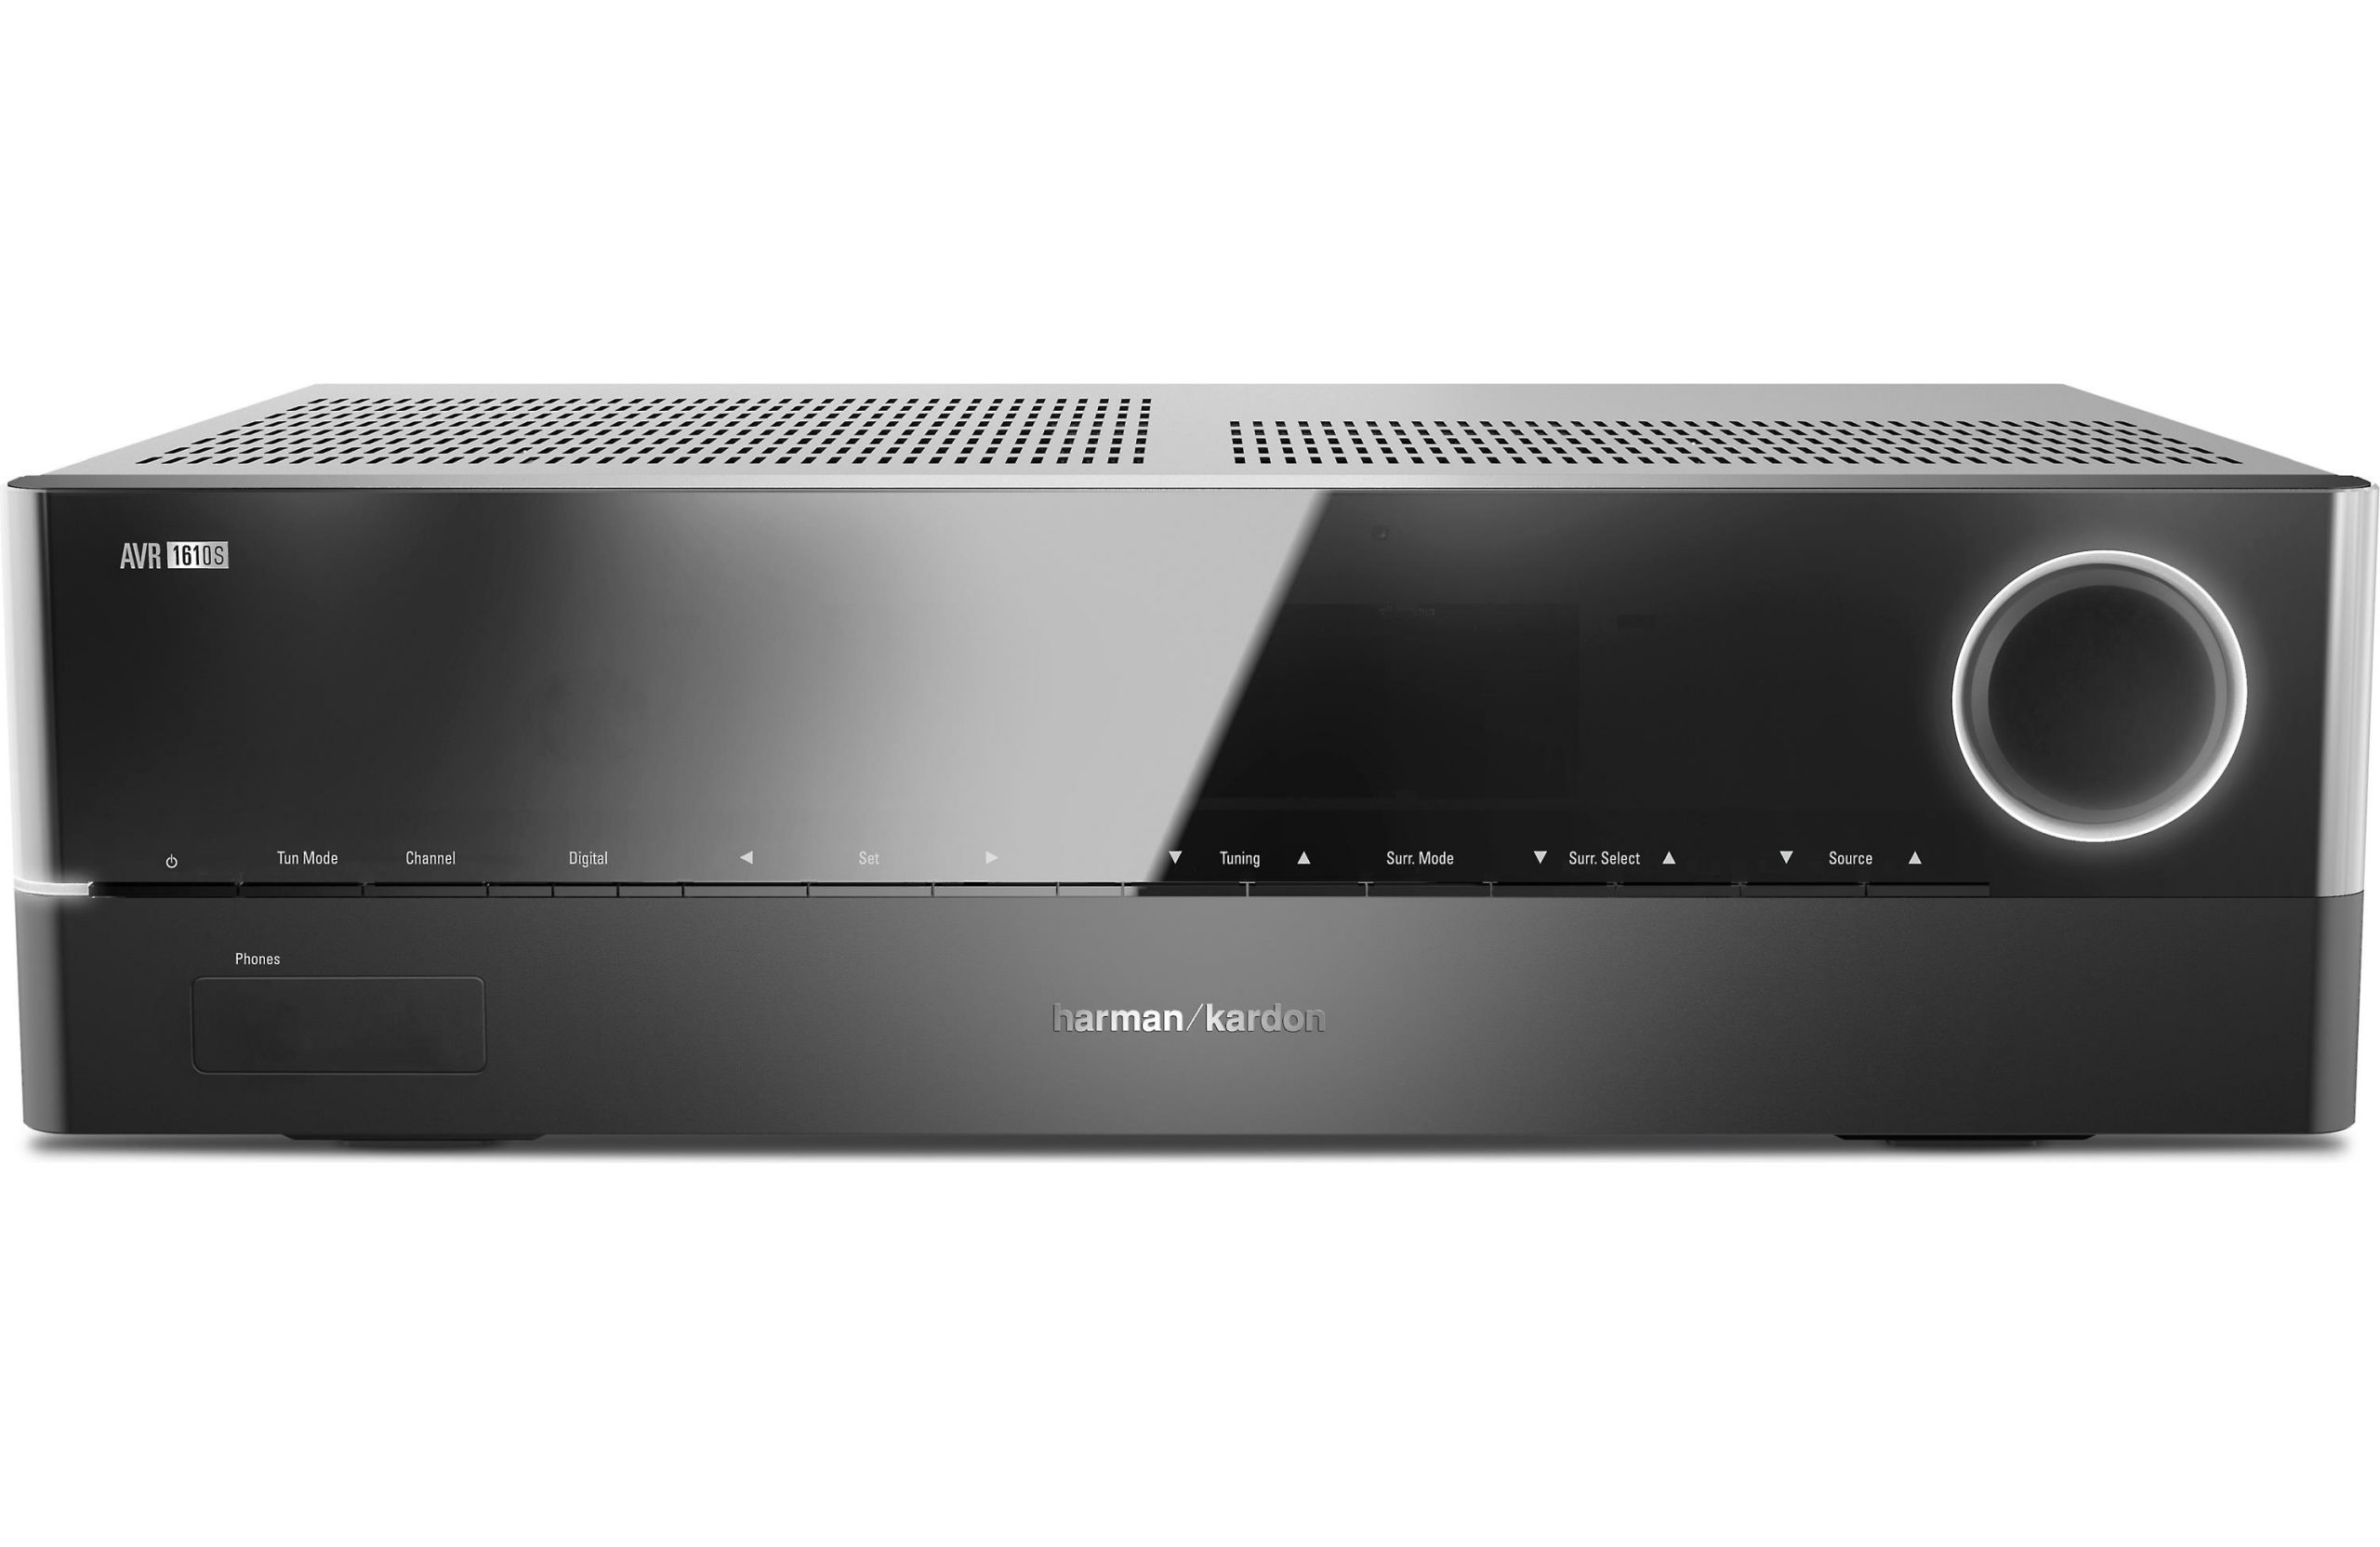 Afwijken prototype zuur Harman Kardon AVR 1610S 5.1-channel home theater receiver with Bluetooth •  Symphony Hifi